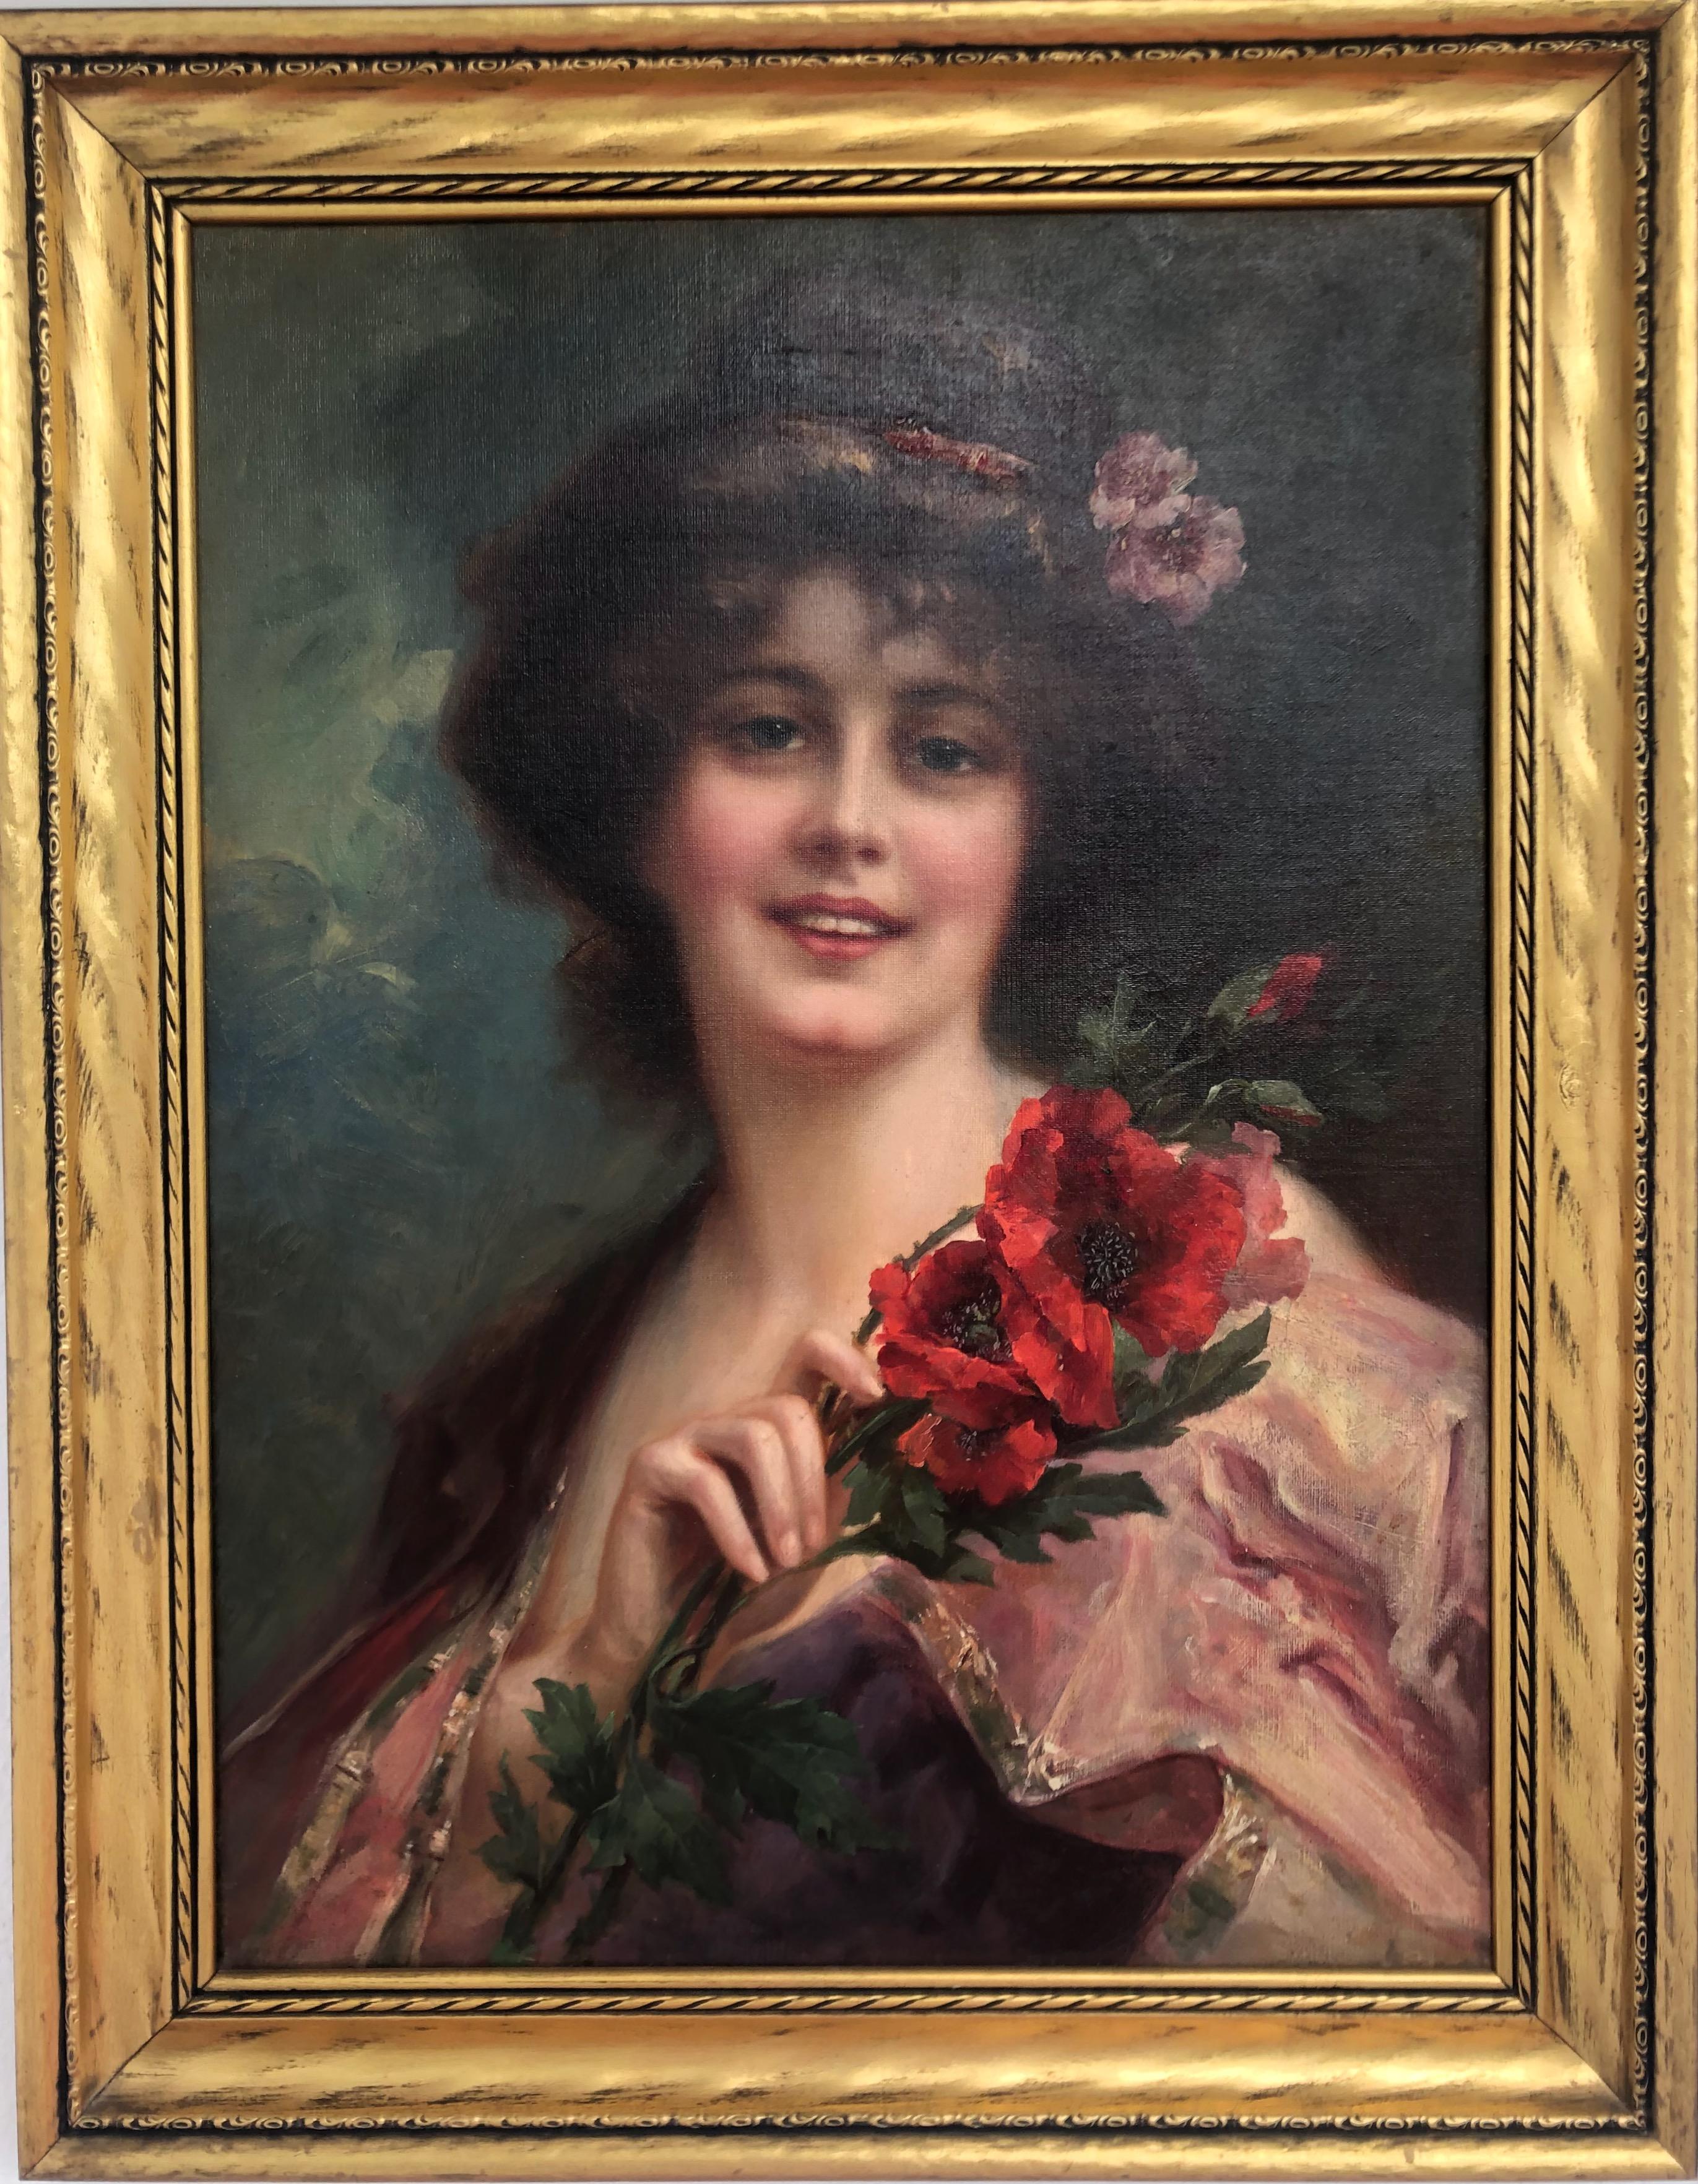 William H. McEntee Portrait Painting - Lady Holding Bouquet Of Red Poppies 